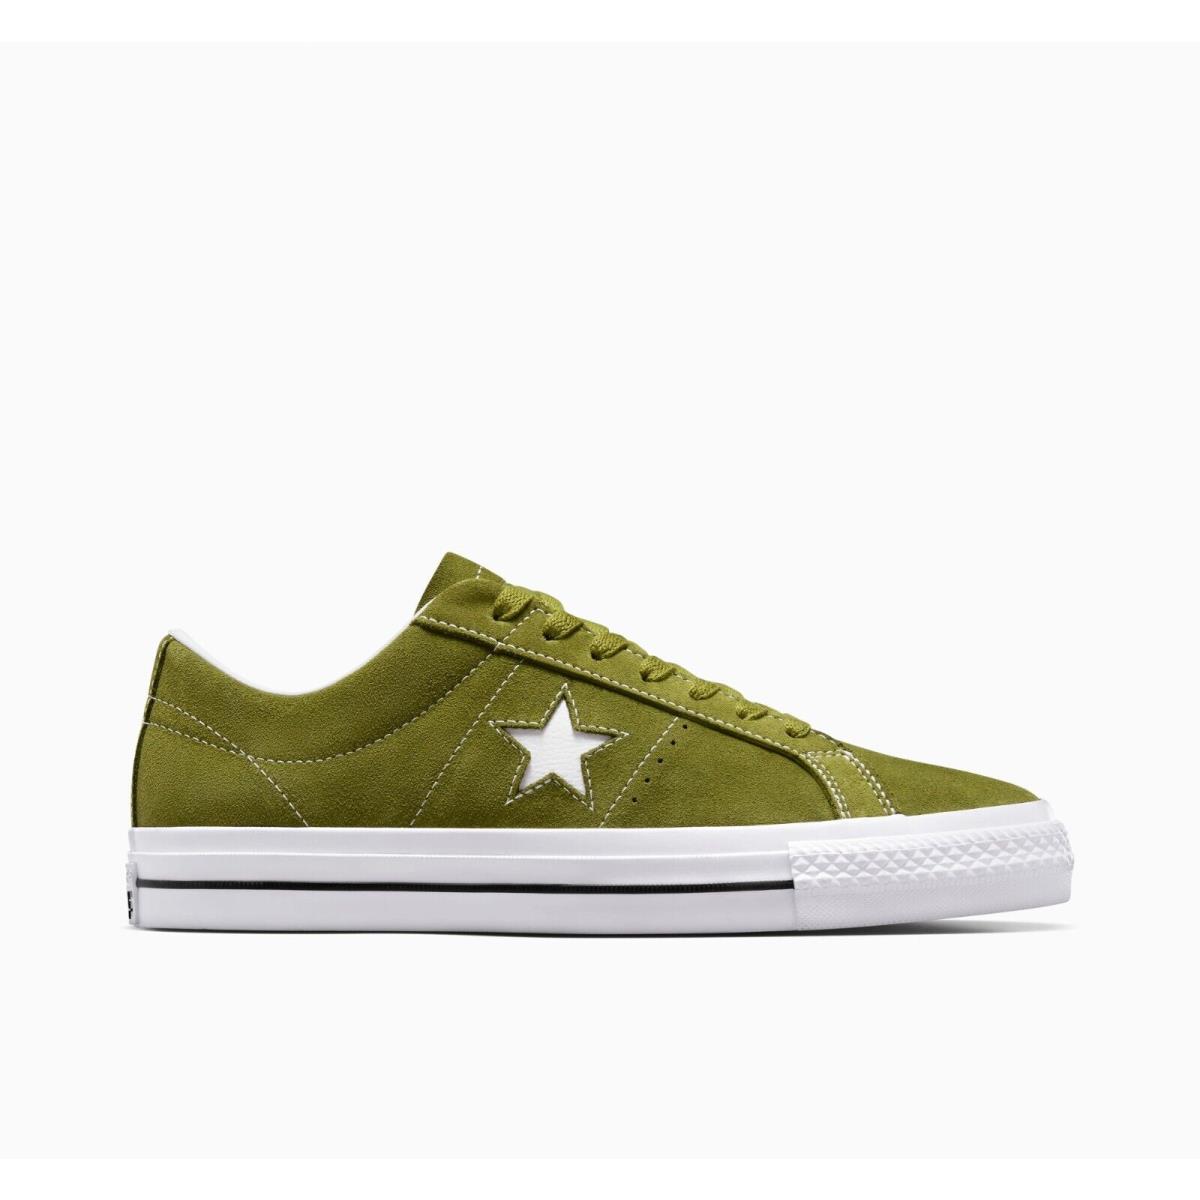 Converse One Star Pro Limited Edition Suede Low Top Men`s Shoes Foam Cushioning Trolled Green/White/Black